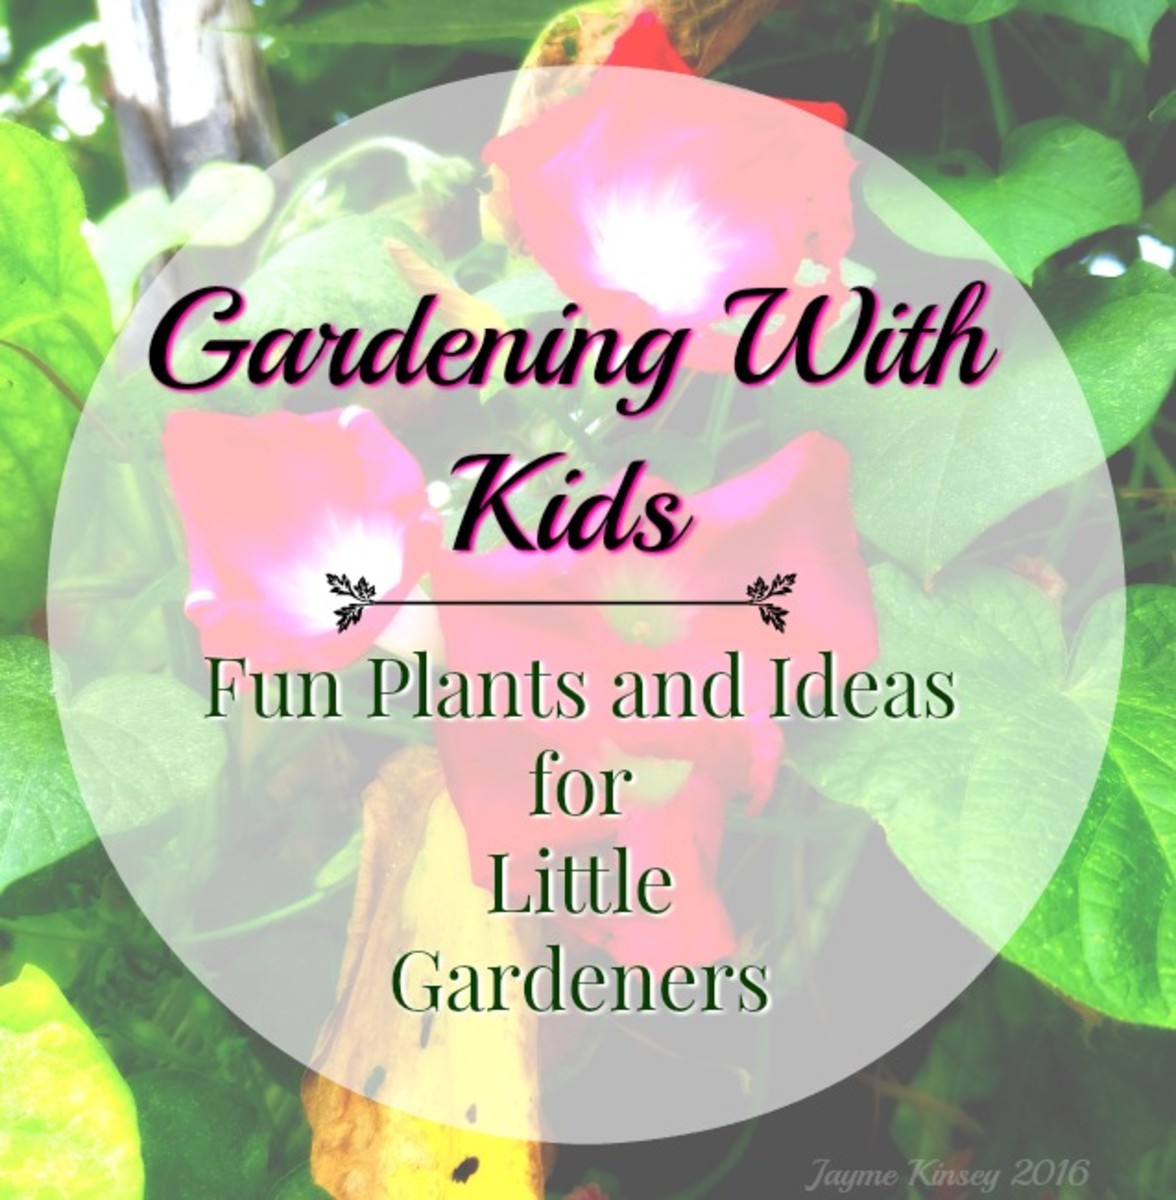 Tips and tricks for gardening with kids!